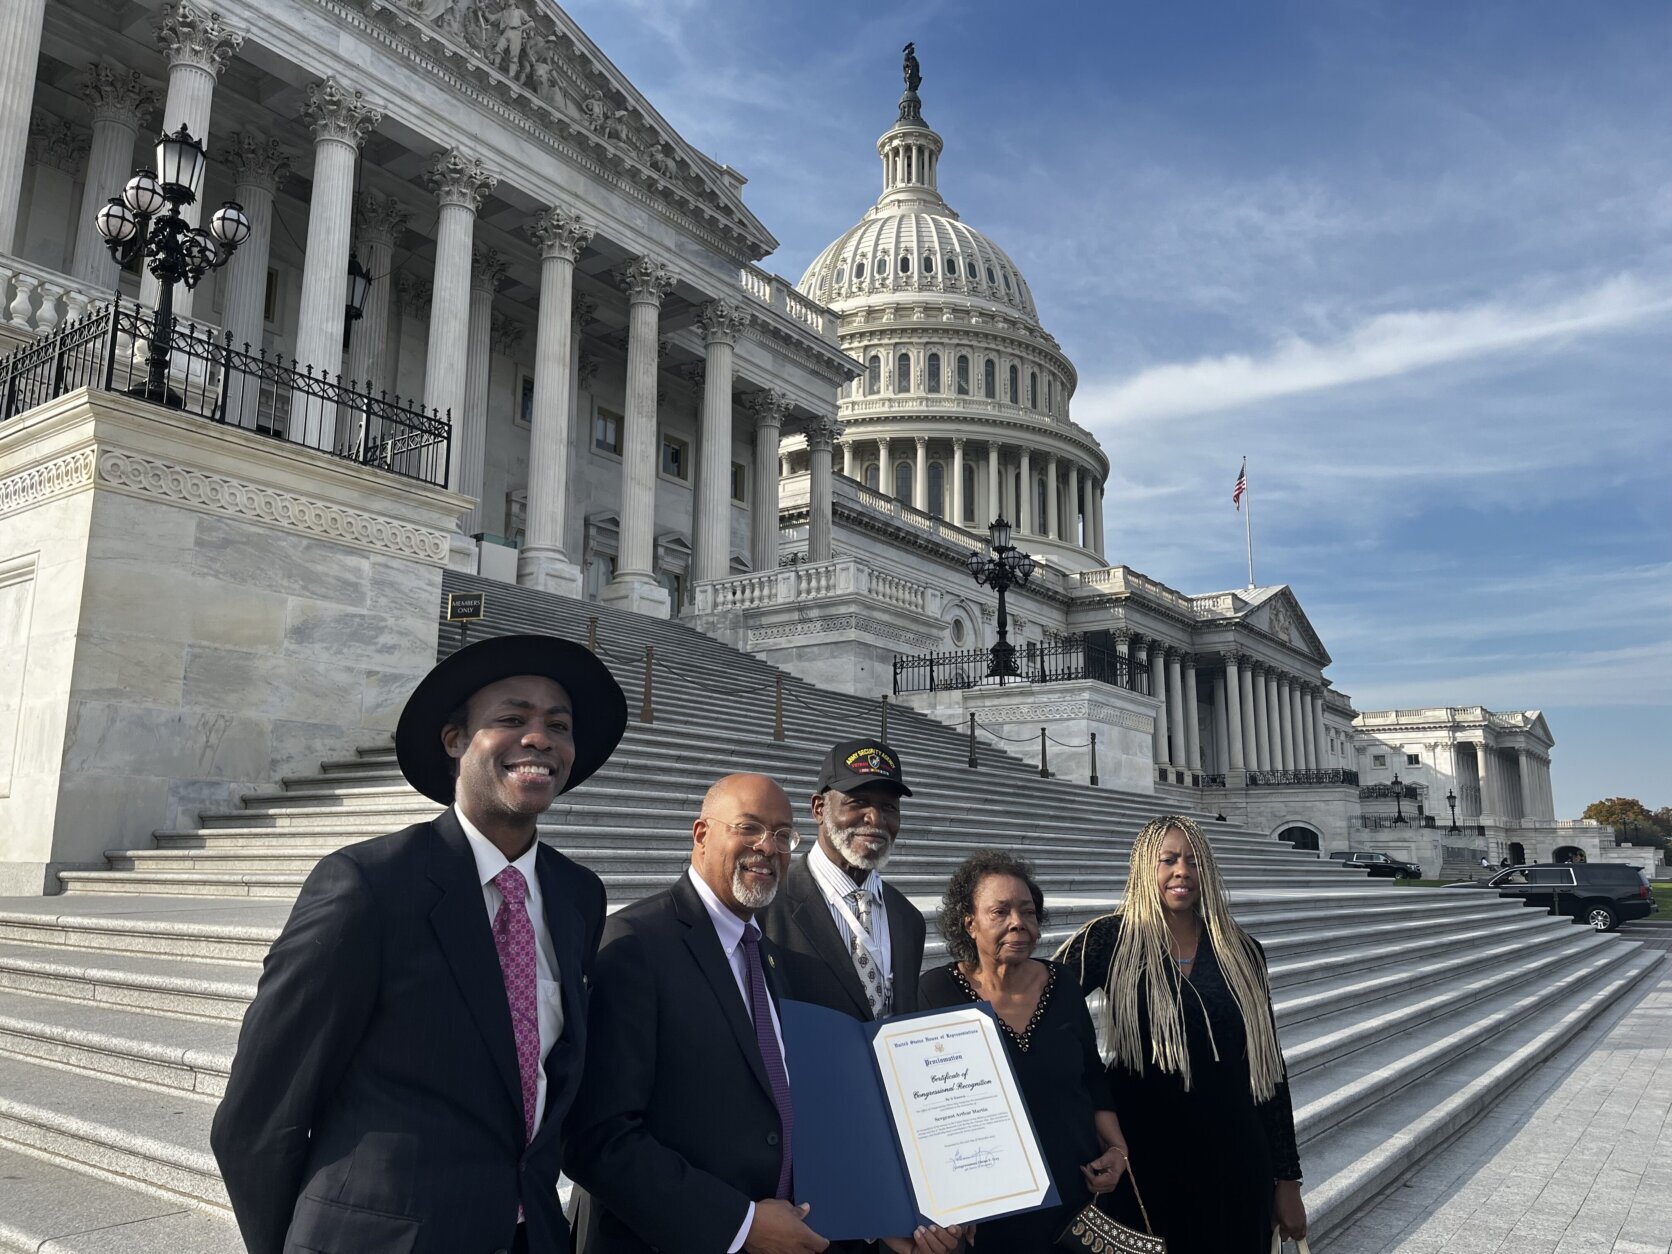 Sergeant Arthur Lee Martin stands at the steps of the U.S. Capitol Building in Washington, D.C. wearing a hat, just behind by four congressional leaders and staff members of color. Congressman Glenn Ivey stands in front of him holding a blue folder with a Congressional Citation inside.